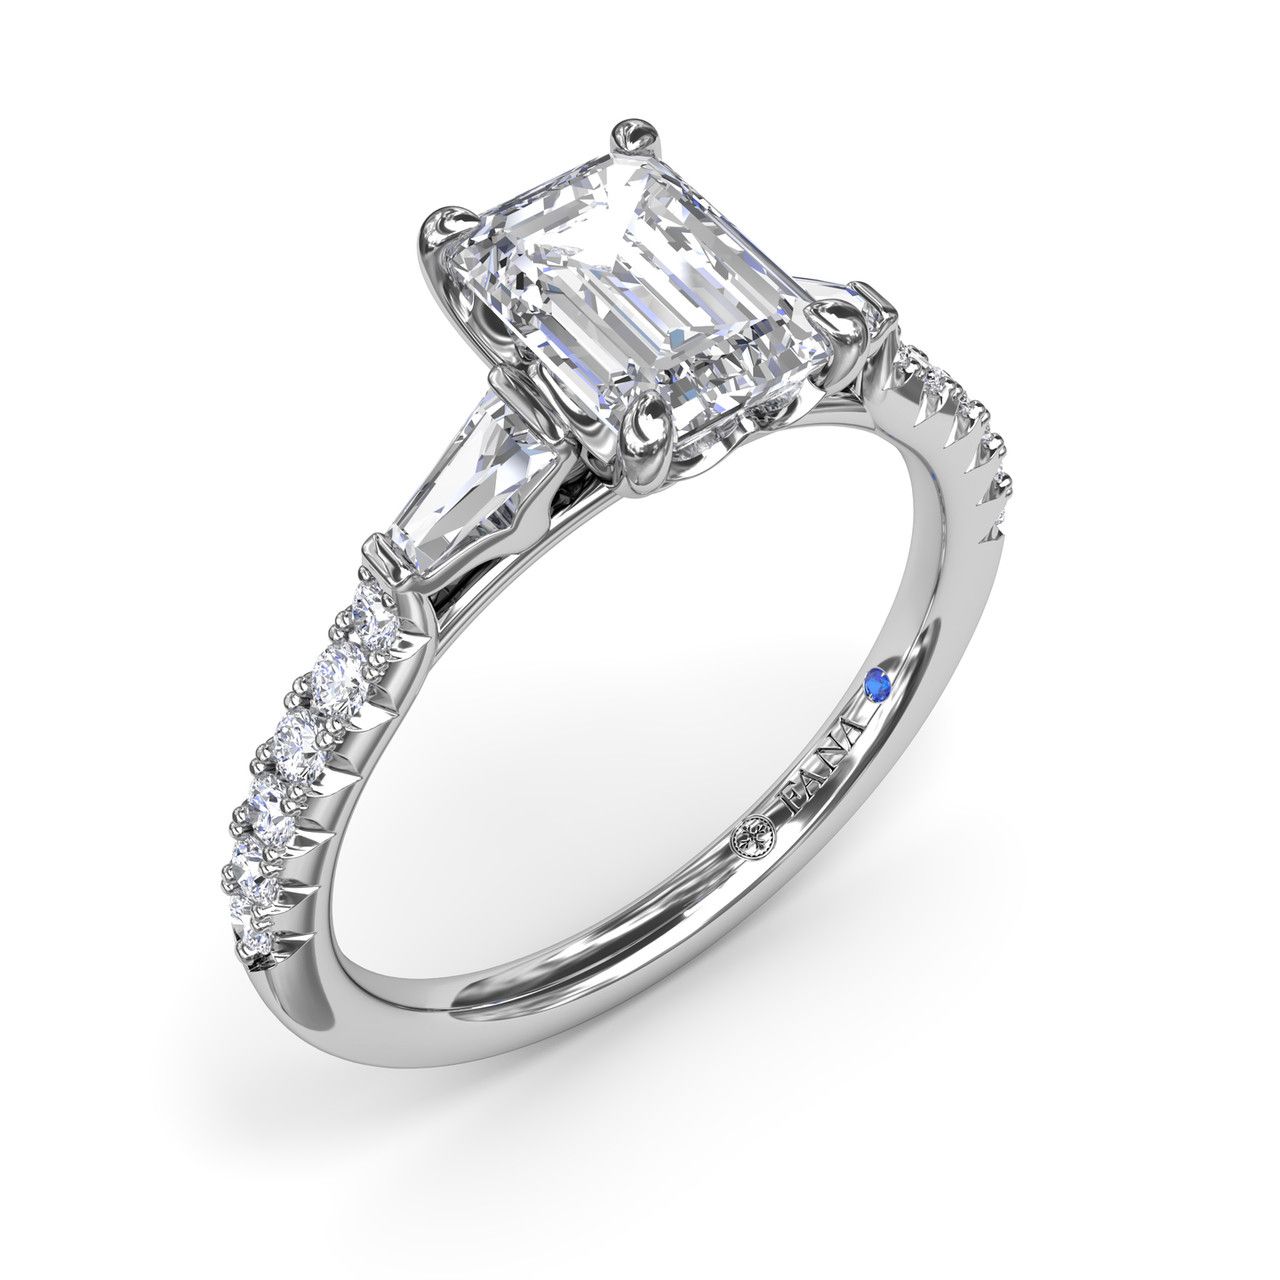 14K WHITE GOLD SEMI-MOUNT RING SIZE 6.5 WITH 18=0.38TW VARIOUS SHAPES (16 ROUNDS & 2 BAGUETTES) G-H SI1-SI2 DIAMONDS AND ONE ROUND BLUE SAPPHIRE   (2.76 GRAMS)